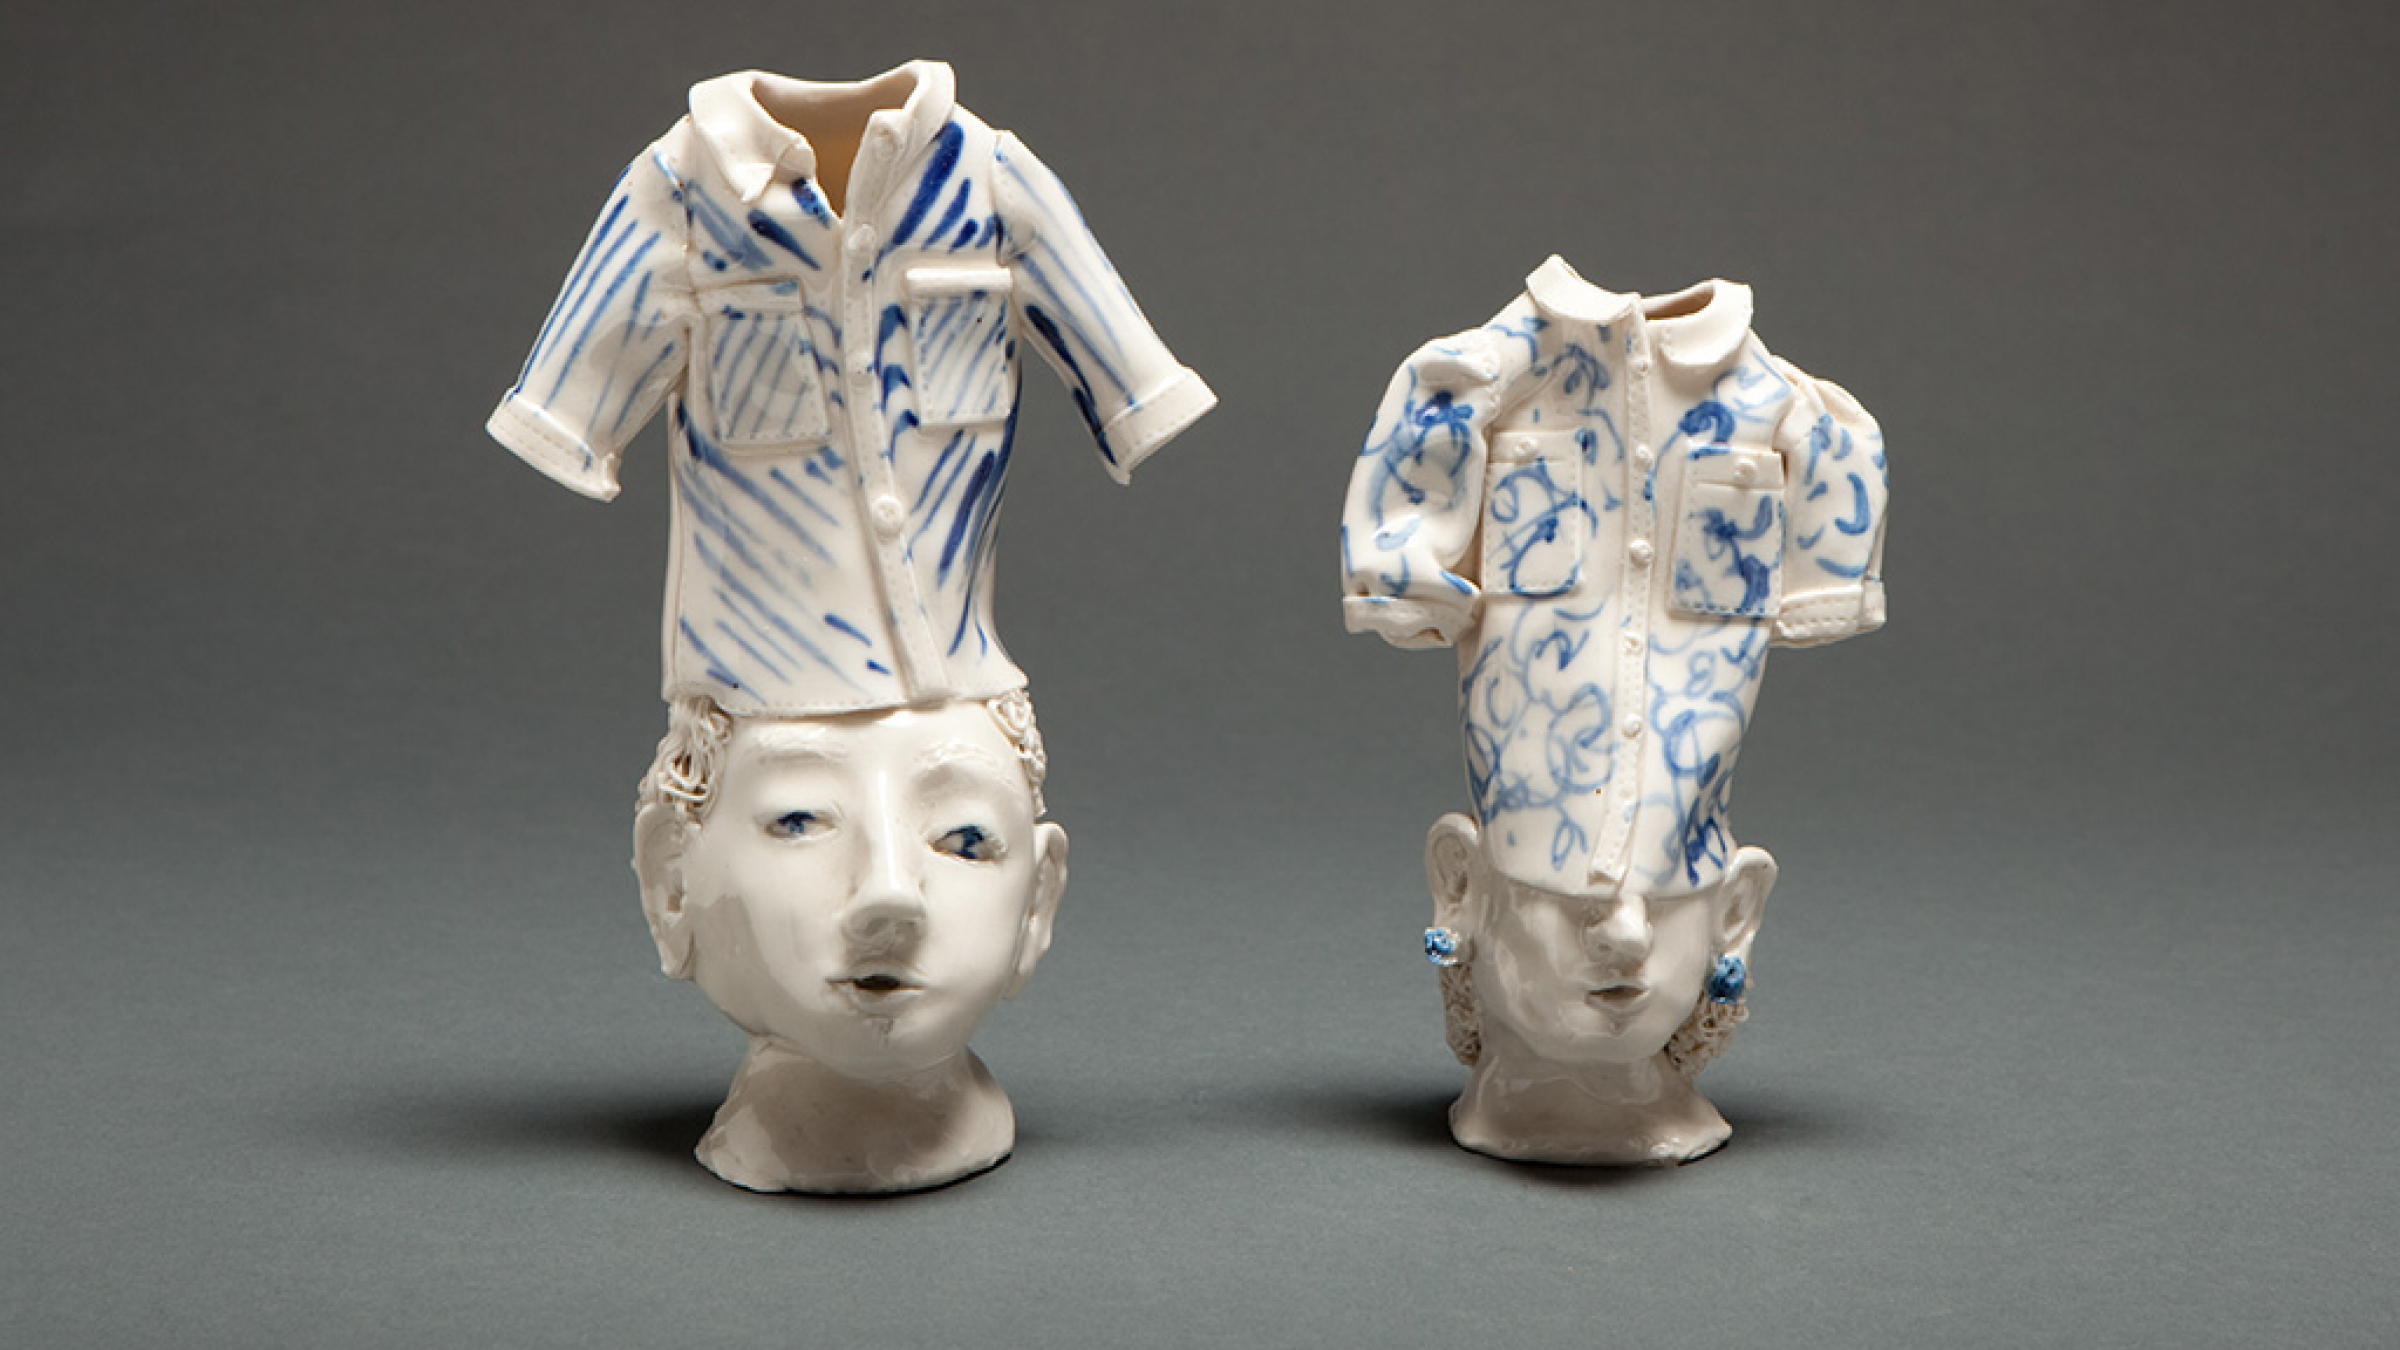 Ceramics and glass in everyday life - The American Ceramic Society